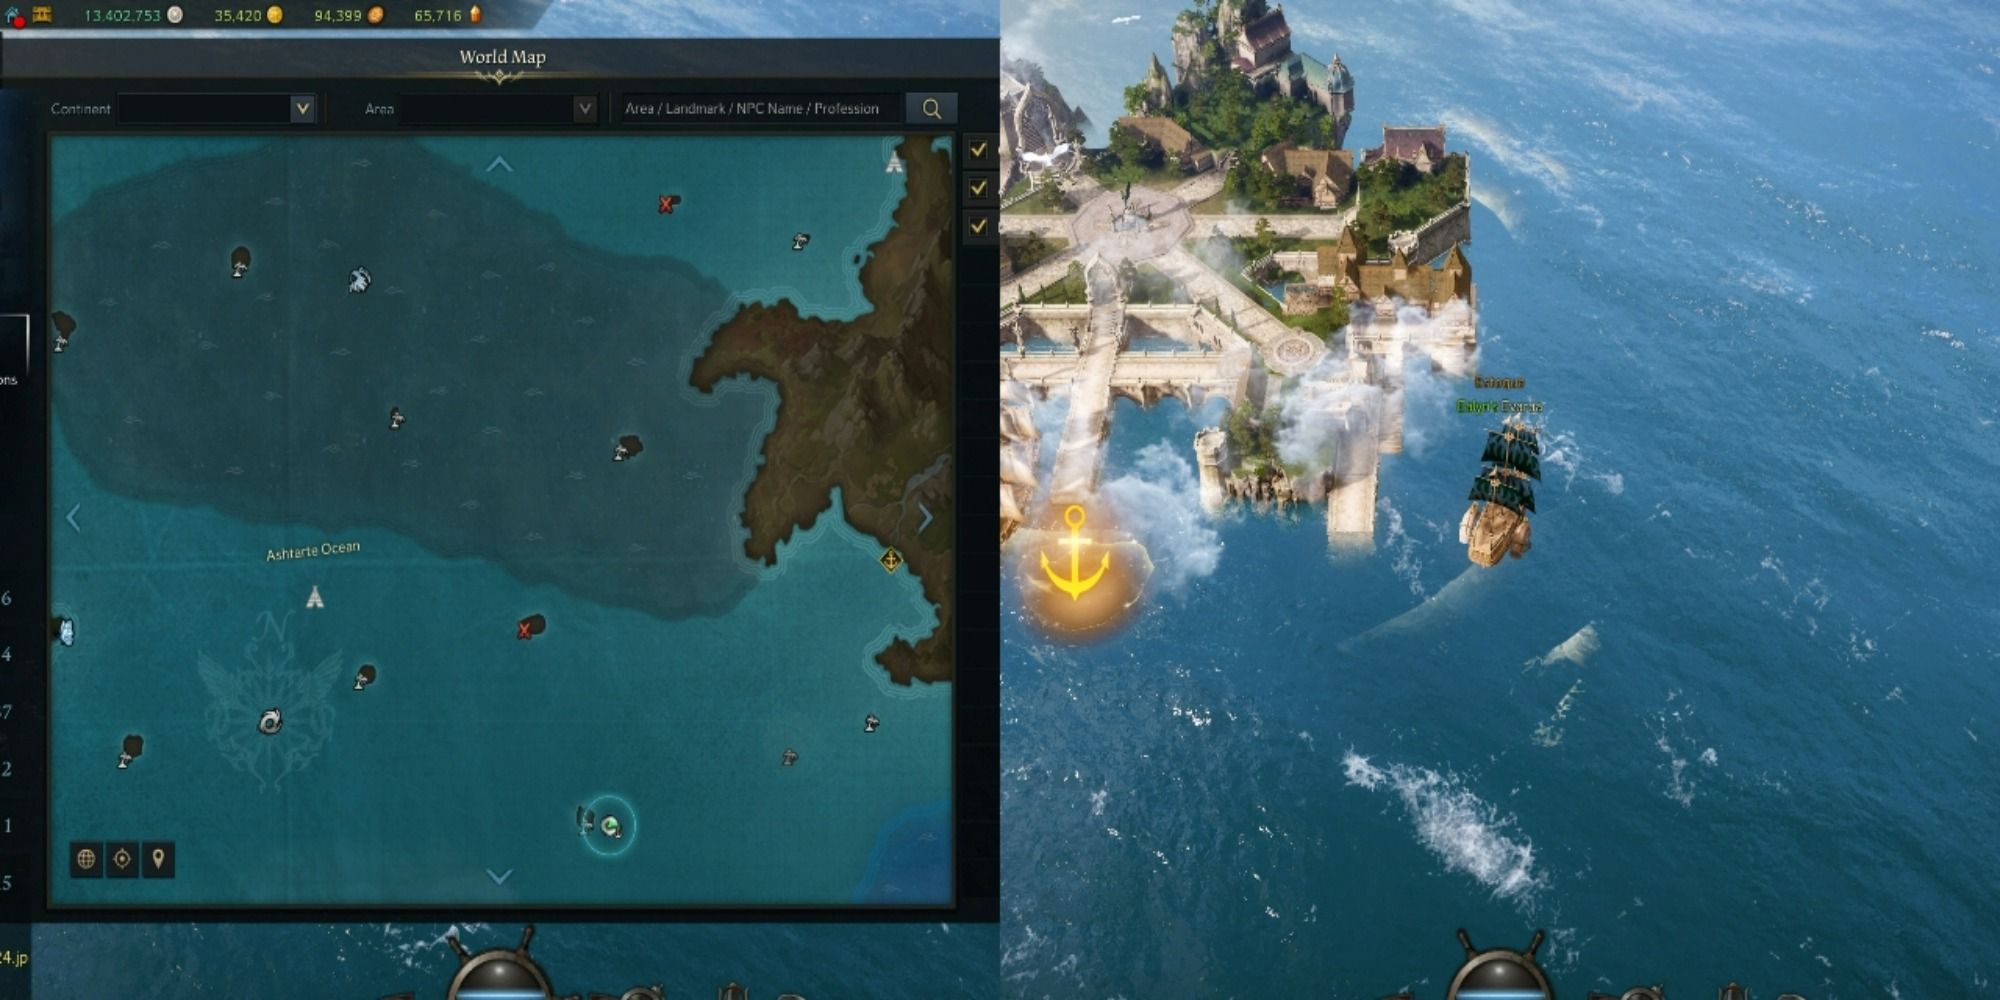 Lost Ark split image of Atropos Island location on open seas and on map